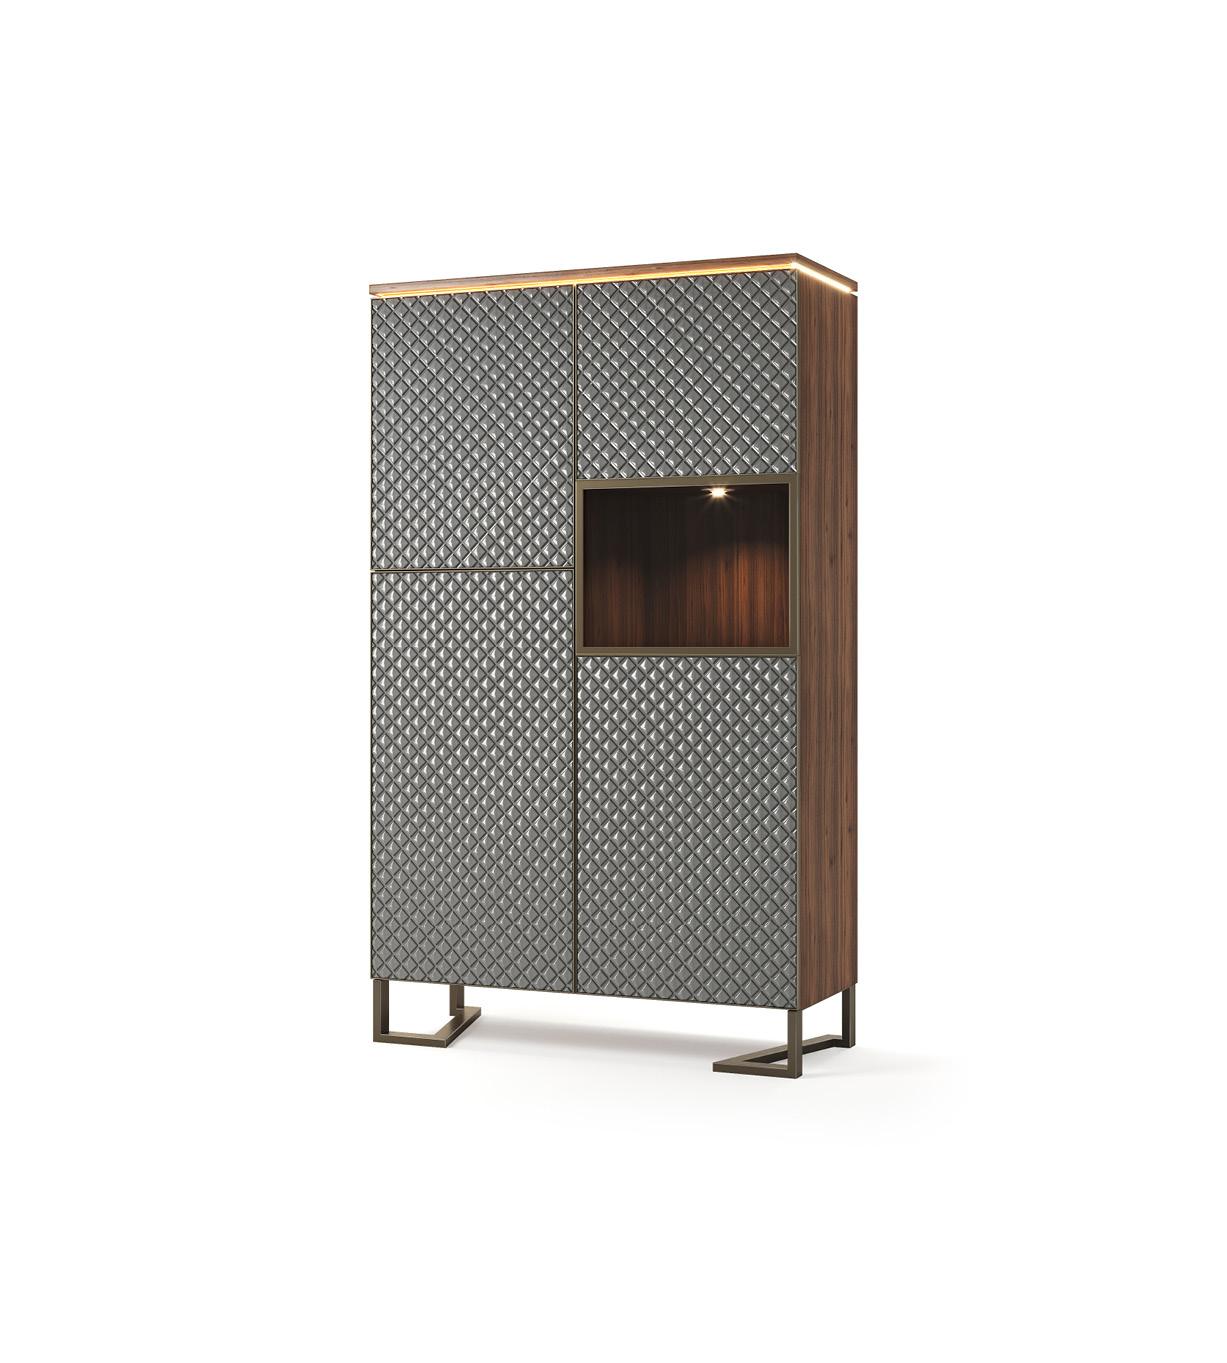 With an authentic and contemporary design, this tall display cabinet, with three doors, portrays the subtlety of woodworking, with shapes inspired by precious jewels.